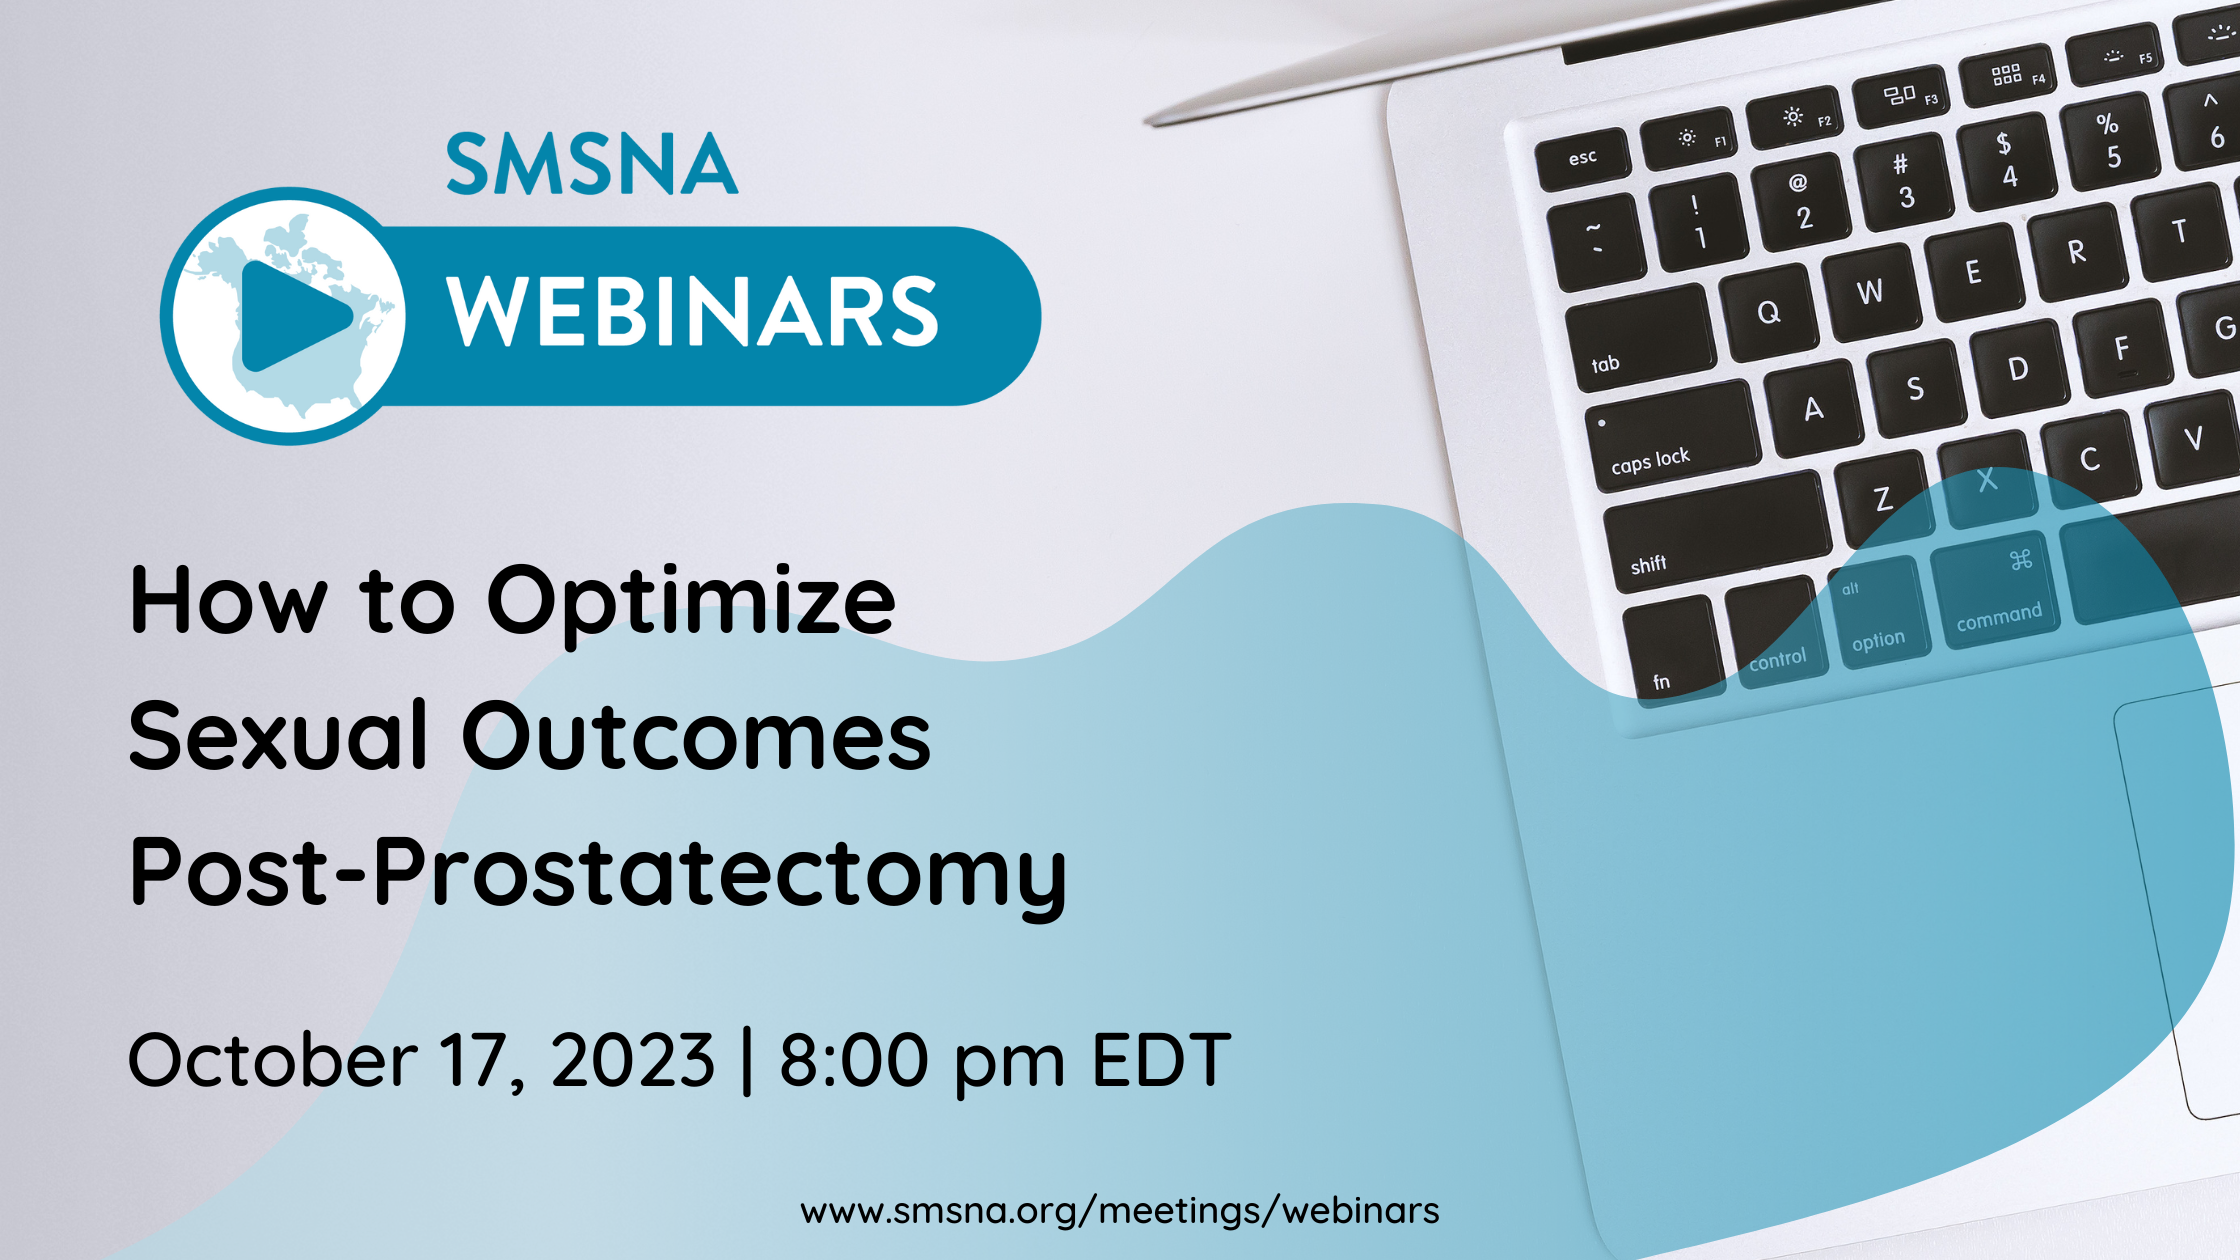 SMSNA Webinar Series: How to Optimize Sexual Outcomes Post-Prostatectomy